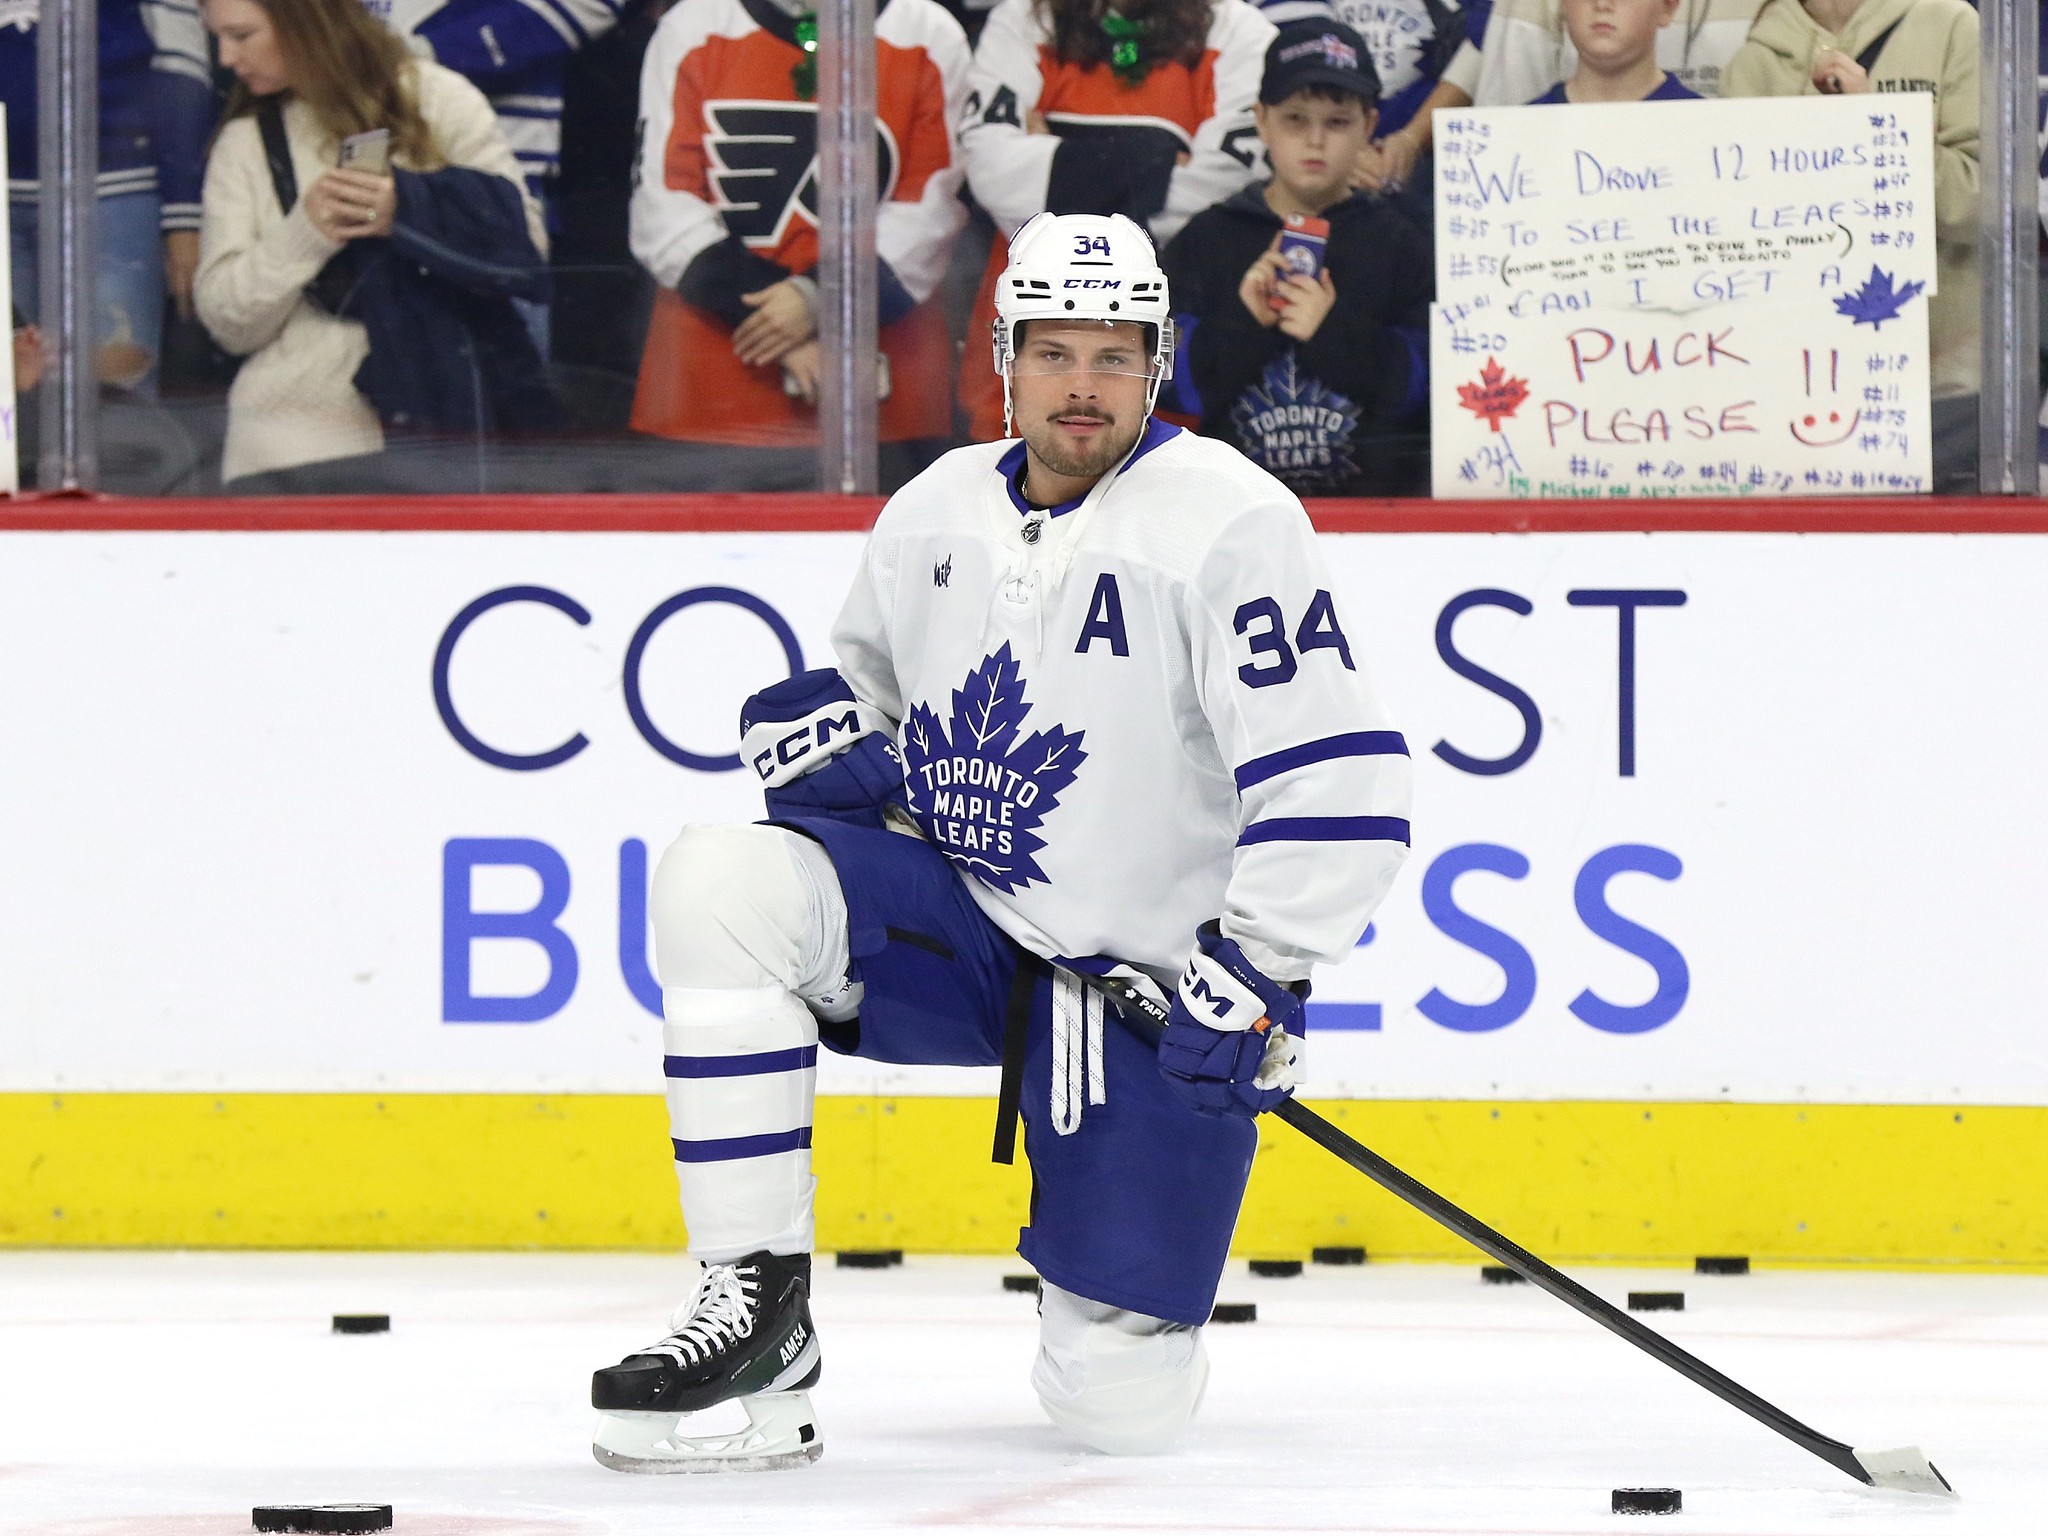 Auston Matthews Moves Into 3rd Place on Maple Leafs’ All-Time Goal List